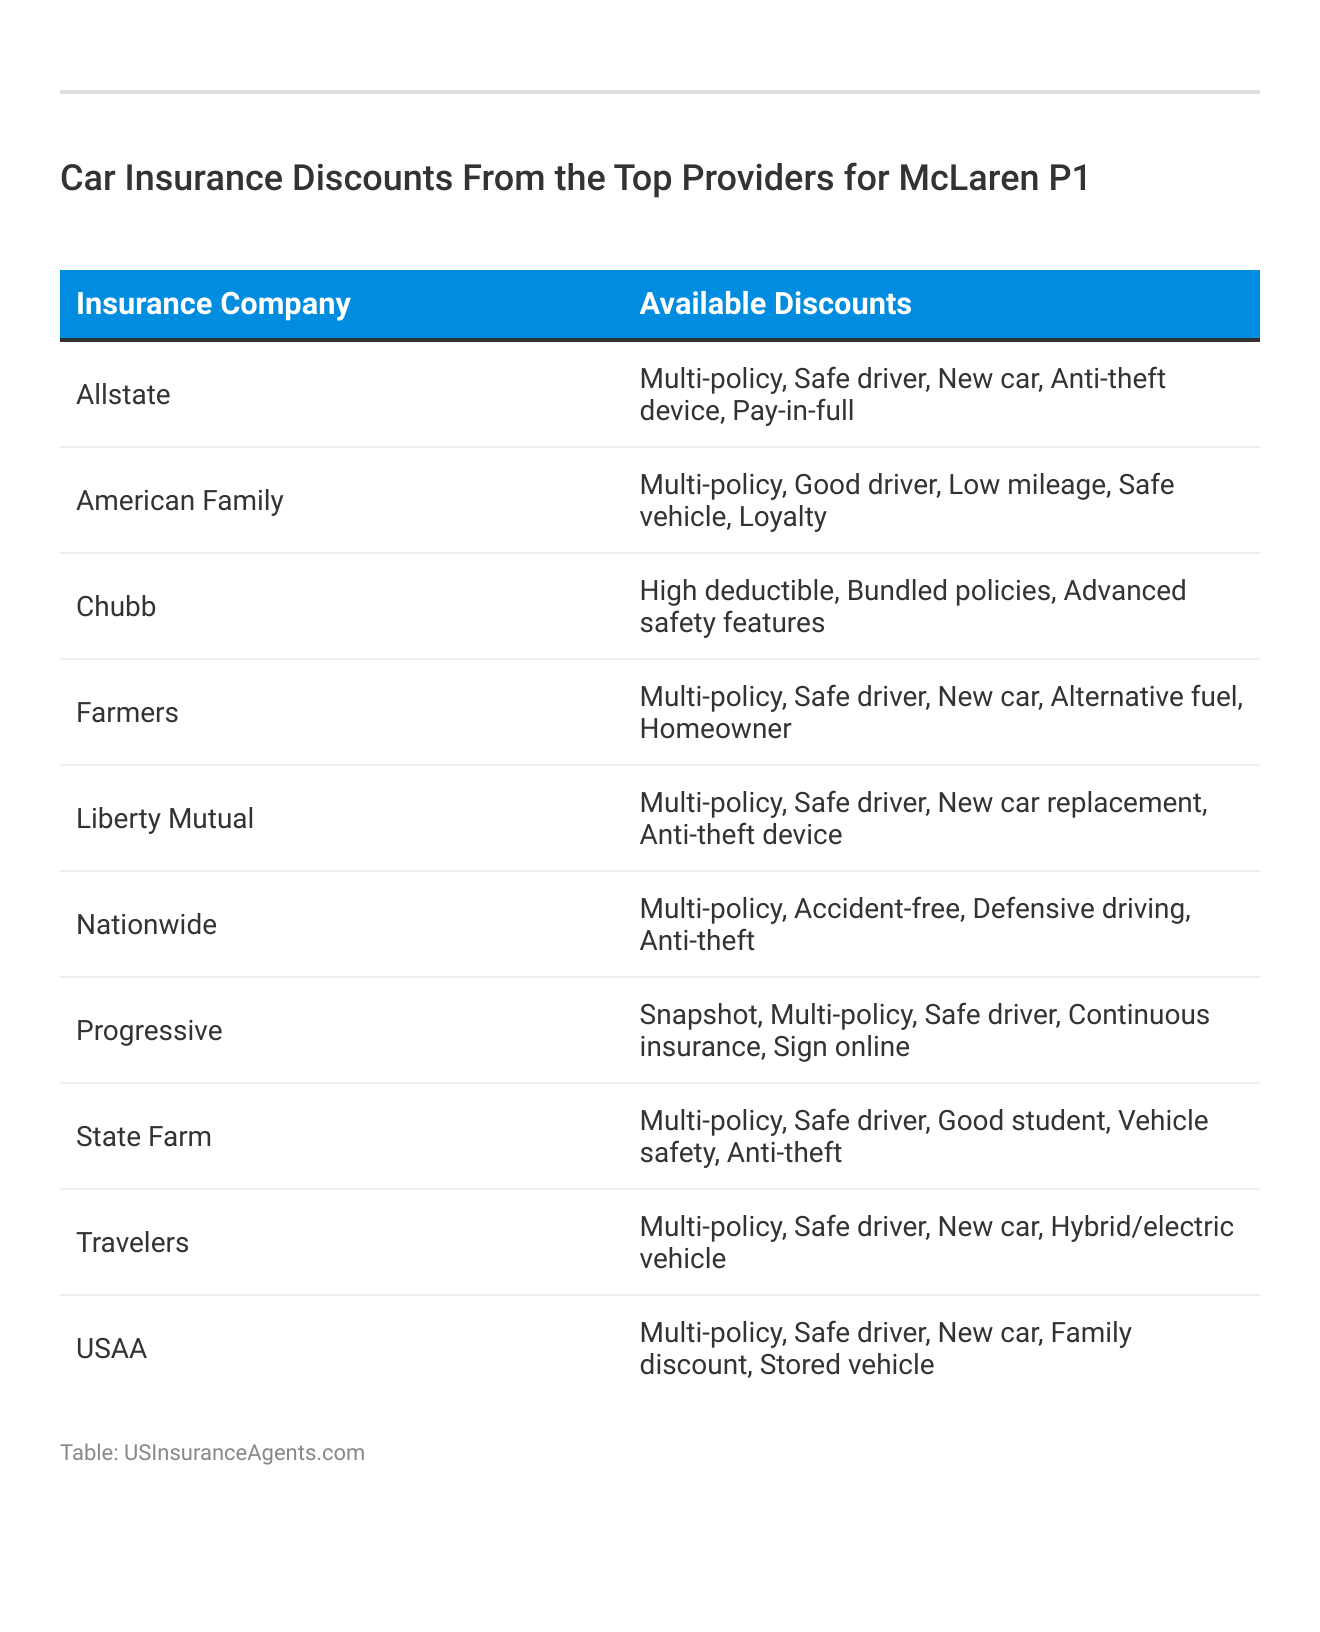 <h3>Car Insurance Discounts From the Top Providers for McLaren P1</h3>